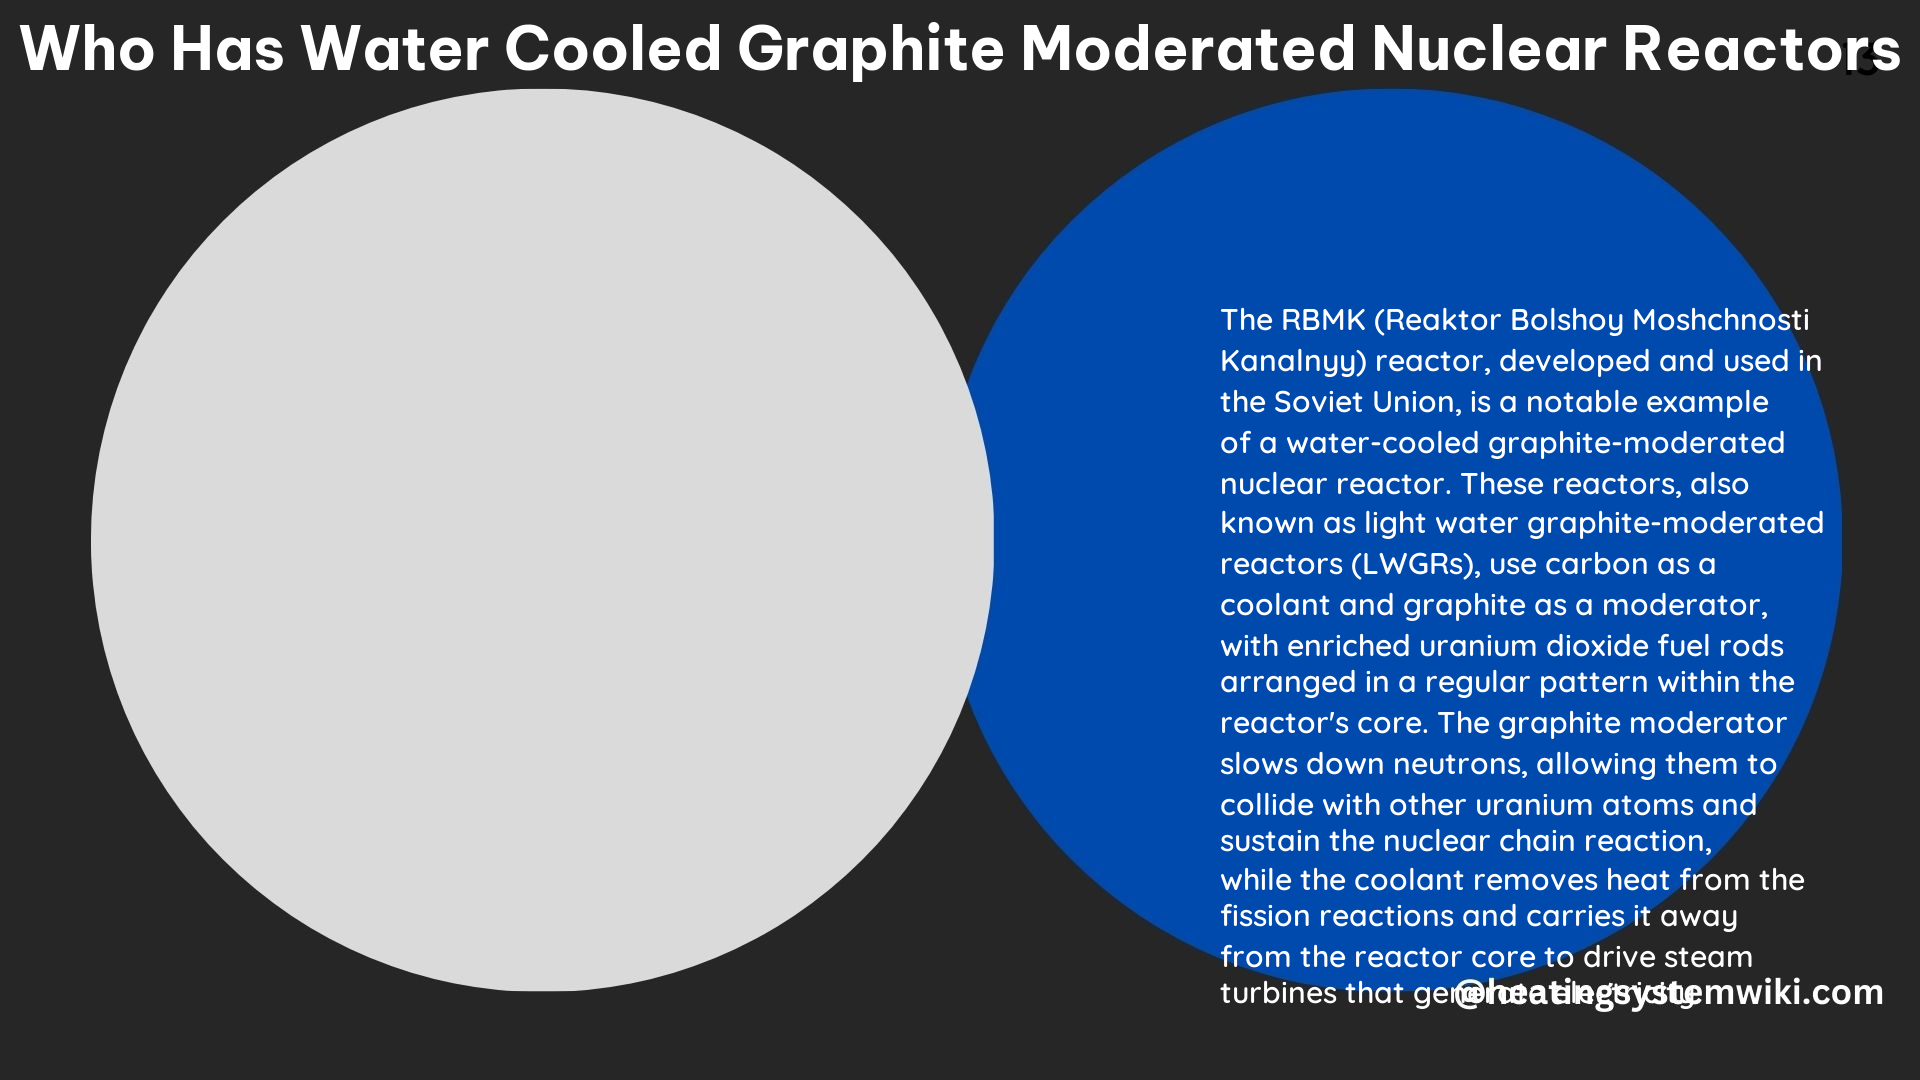 Who Has Water Cooled Graphite Moderated Nuclear Reactors